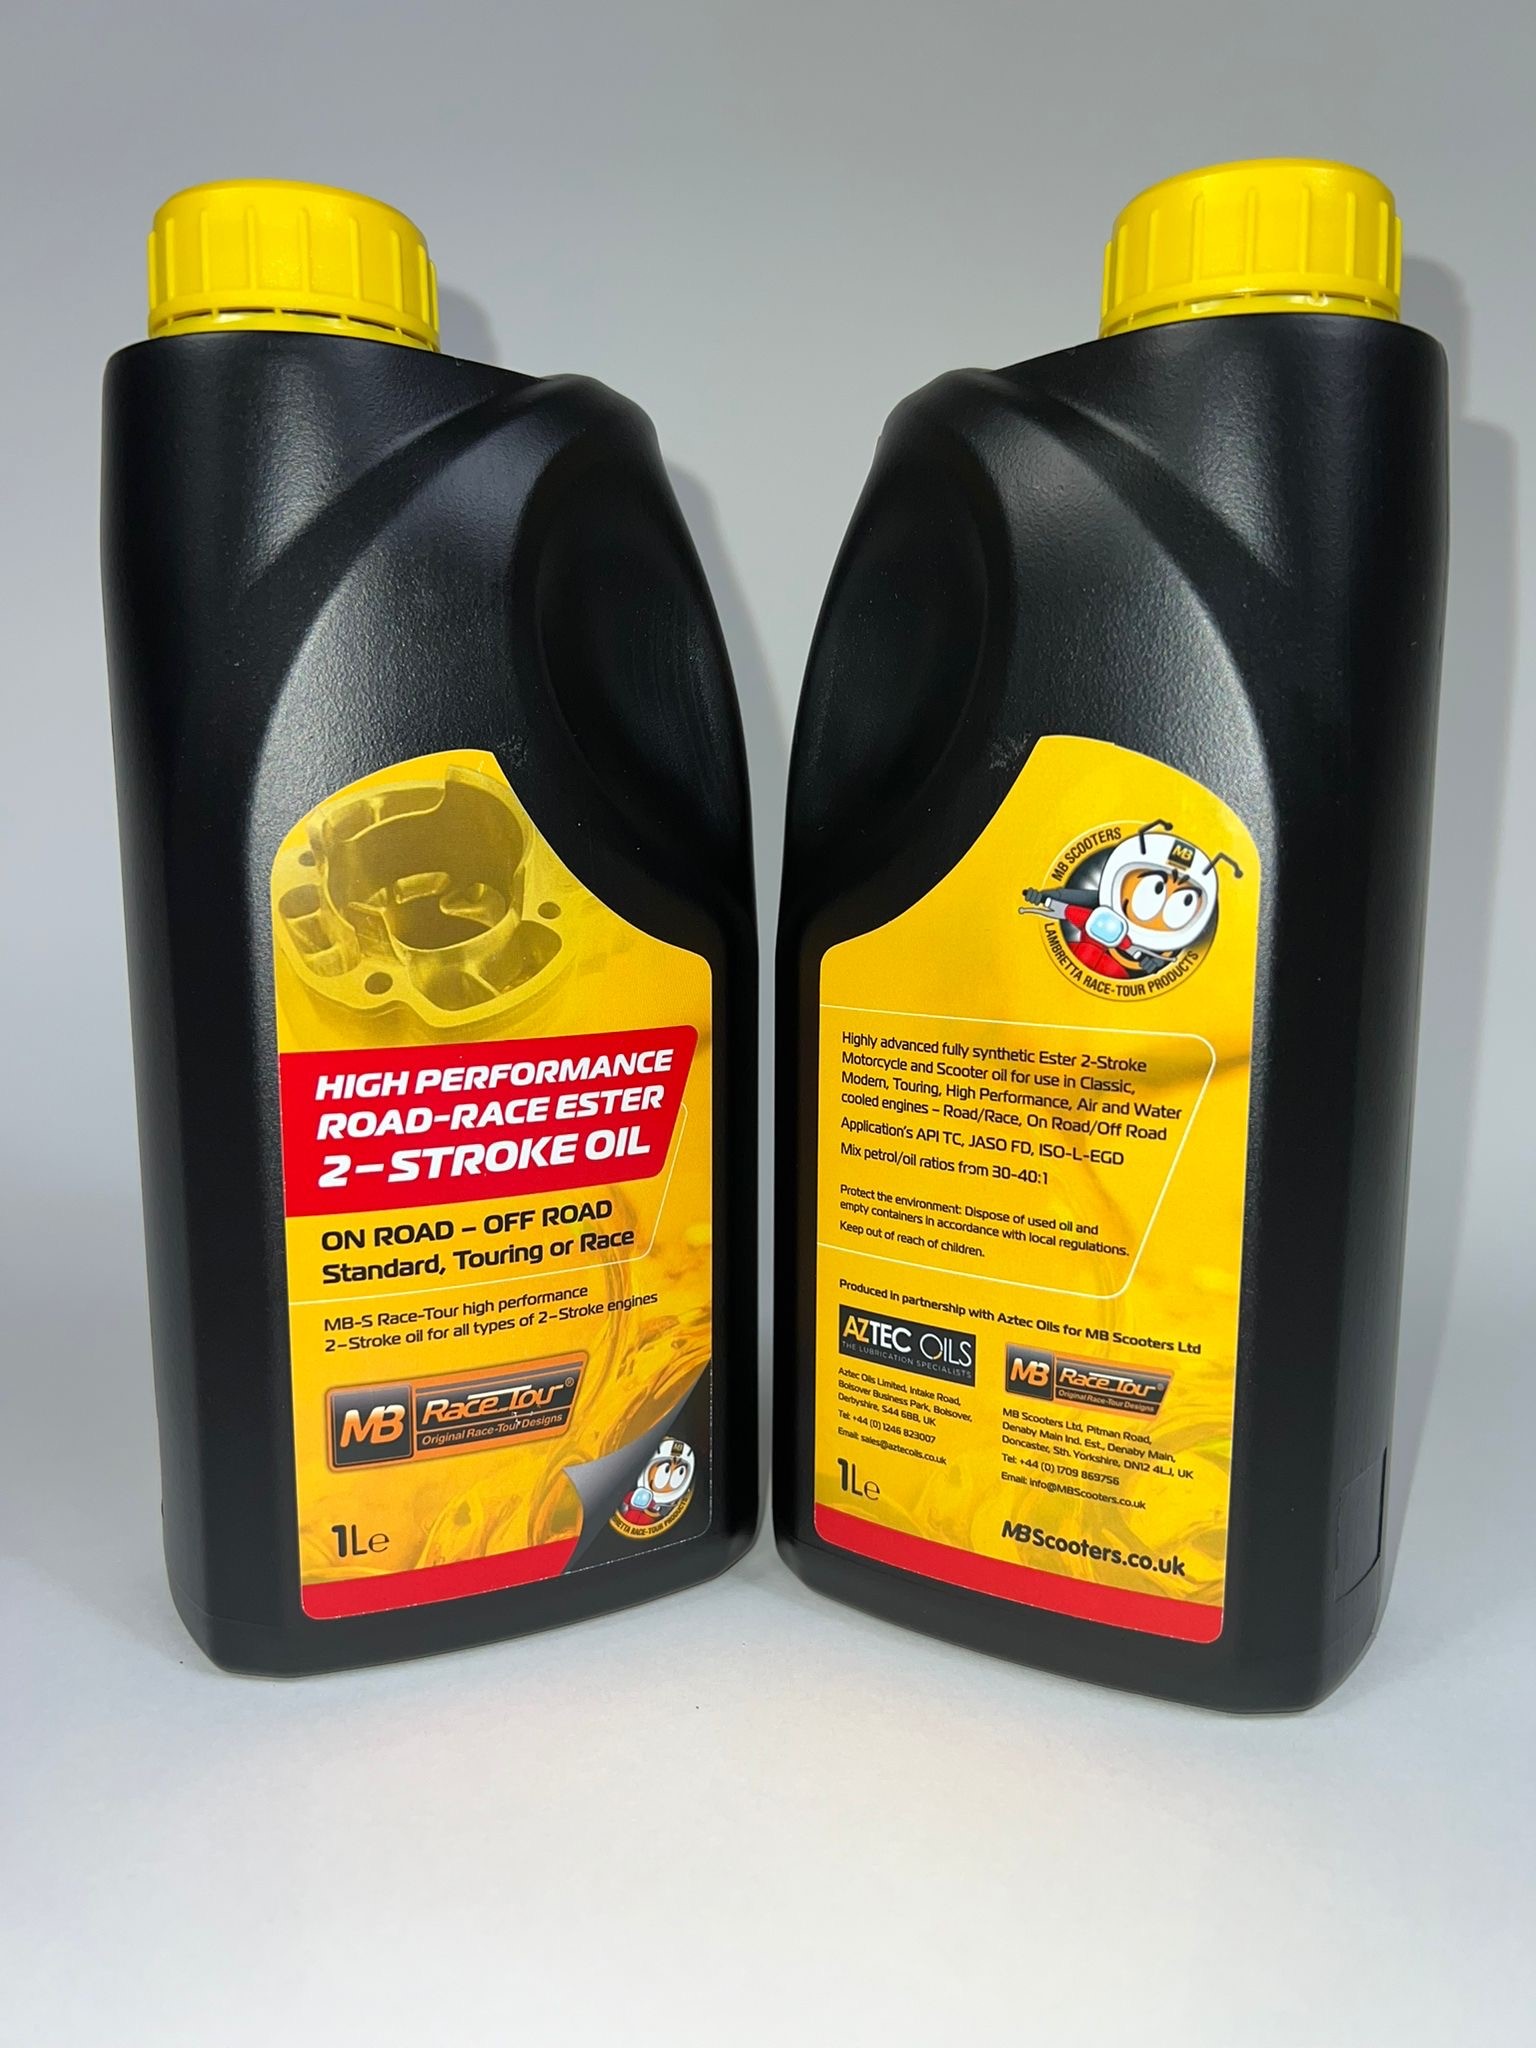 Universal Race-Tour Fully synthetic Ester 2-stroke oil, 1L, MB